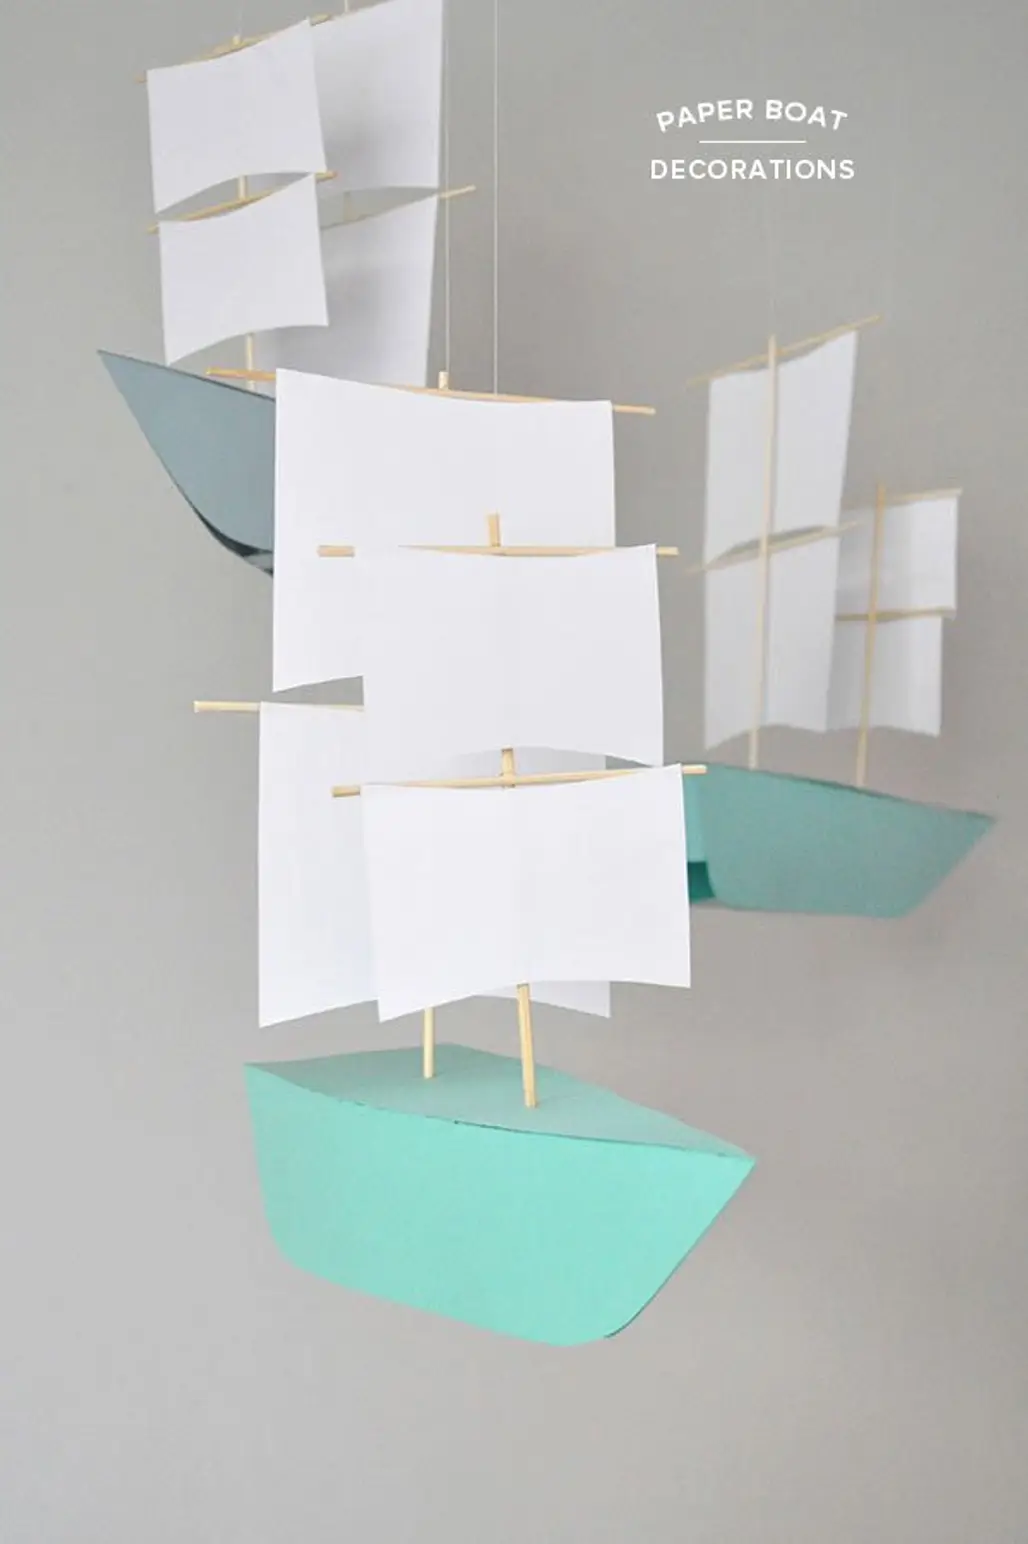 7 Adorable Sailboat Craft Projects That You Can Make